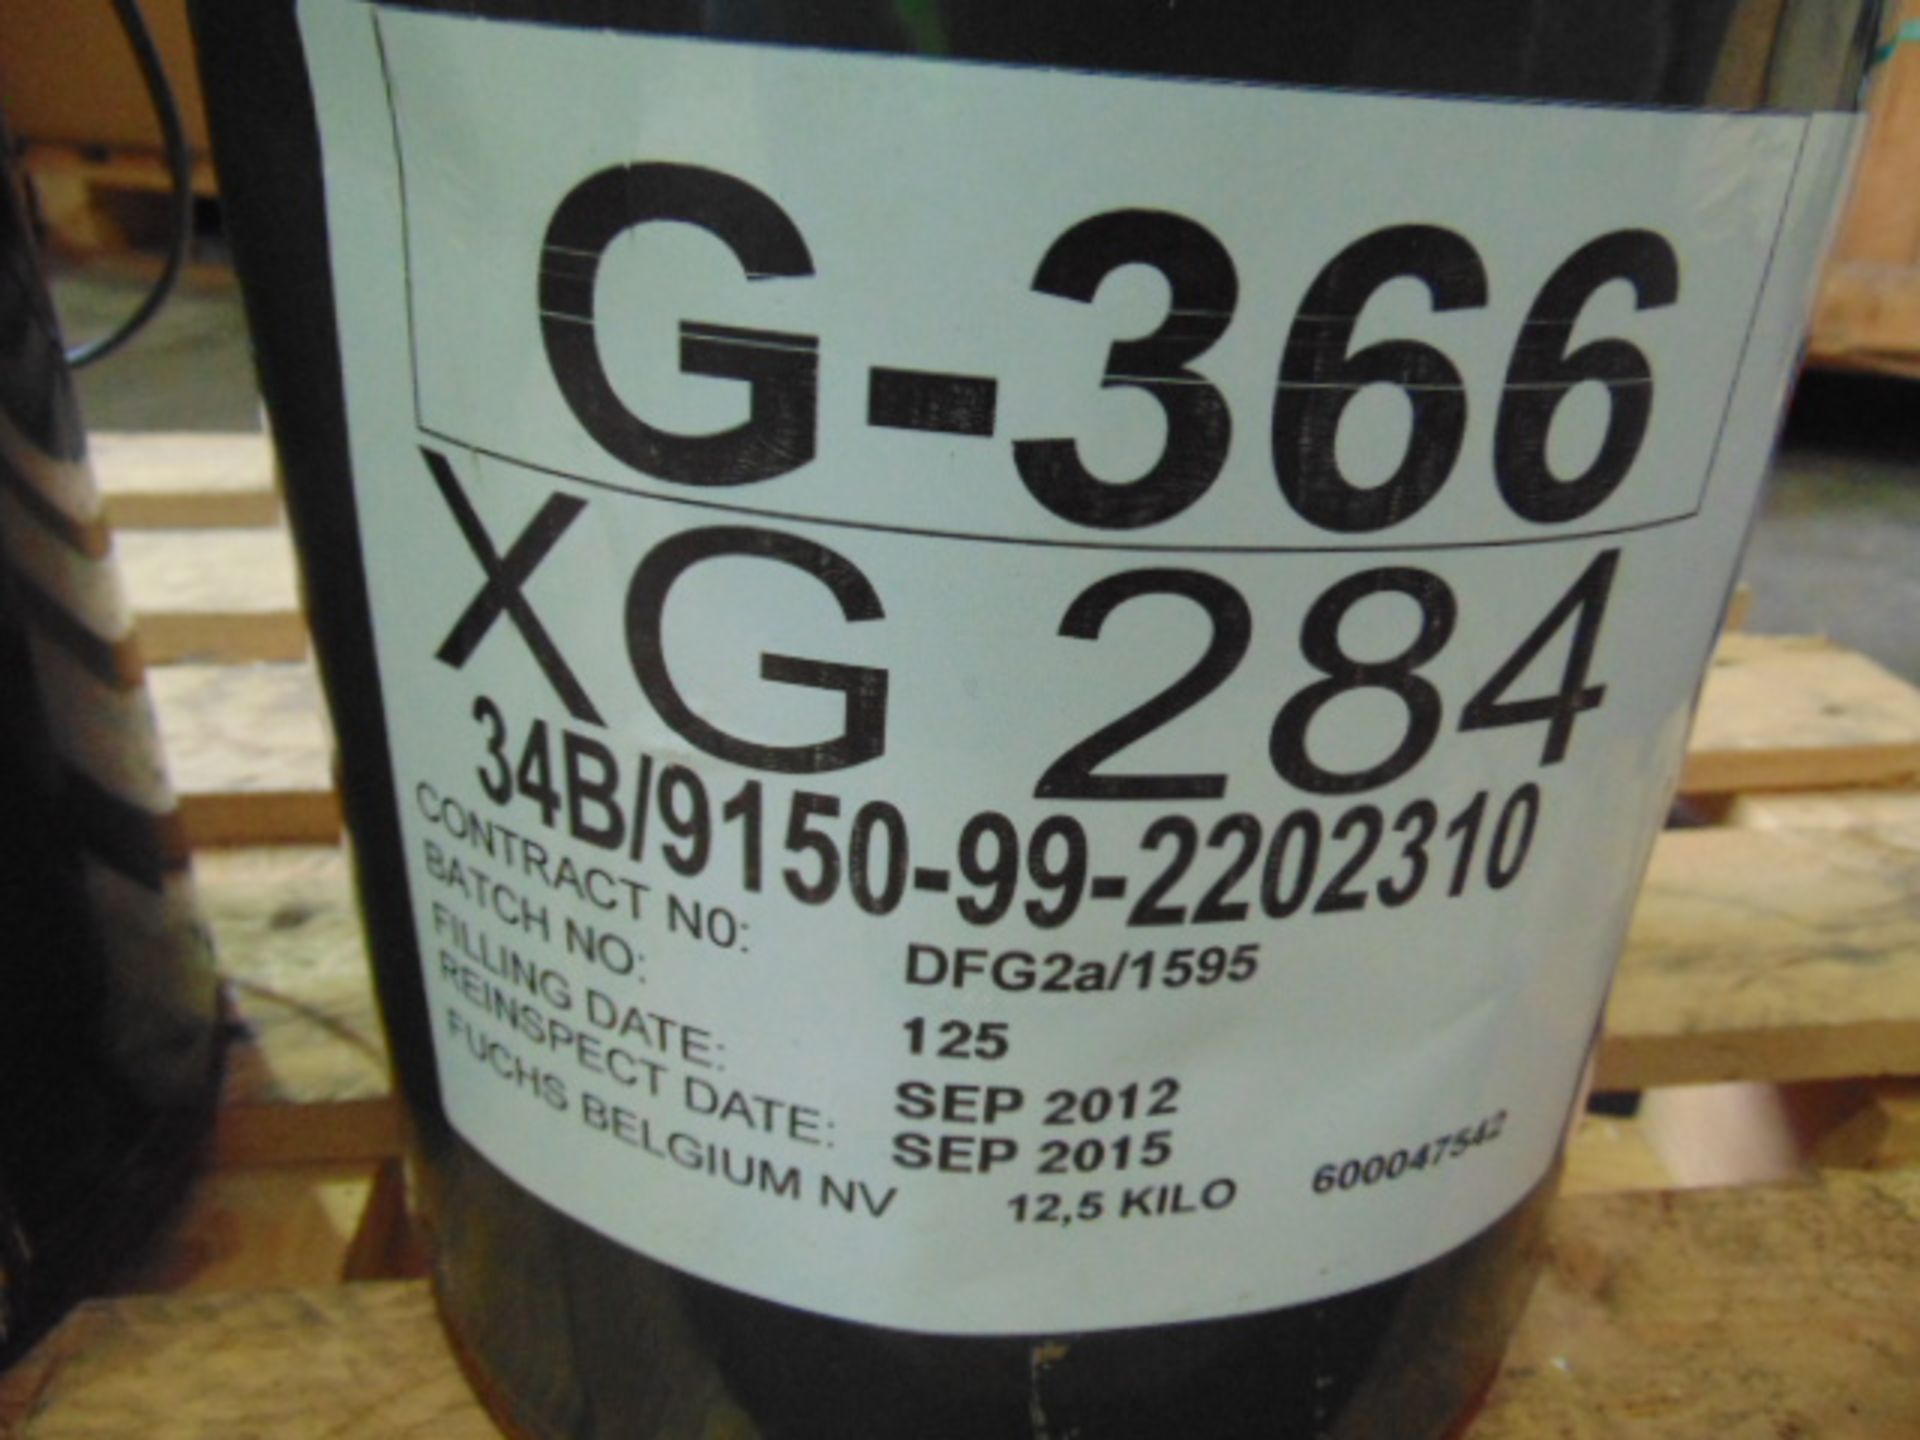 Qty 2 x 12.5Kg G-366/XG-284 Oscillating Bearing Grease direct from reserve stores - Image 2 of 2